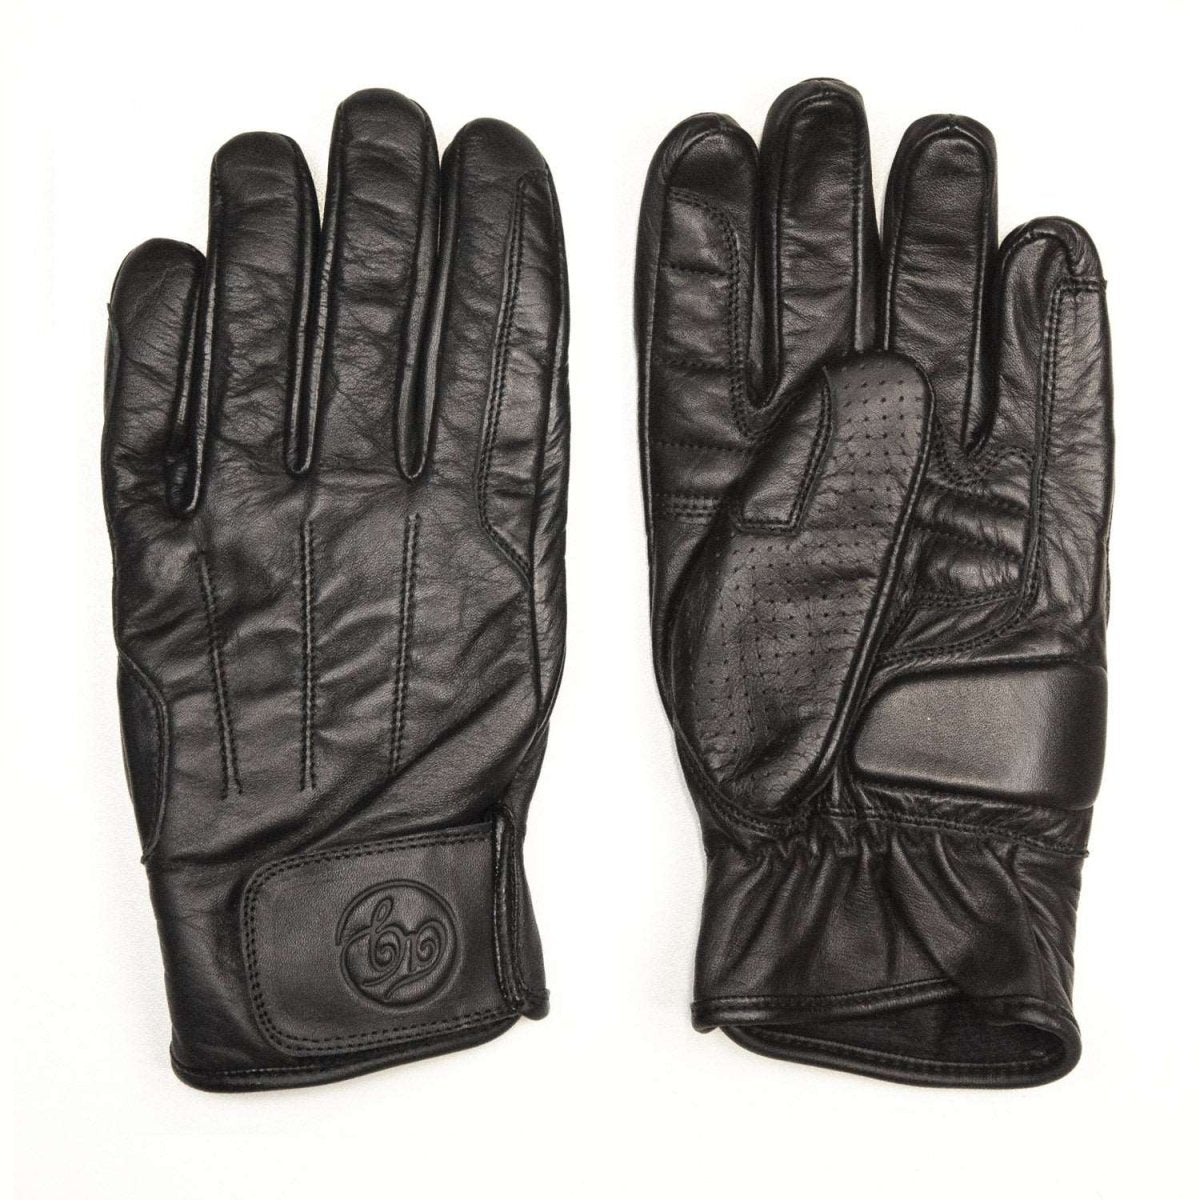 Age of Glory Rover Leather CE Waxed Gloves in Black 